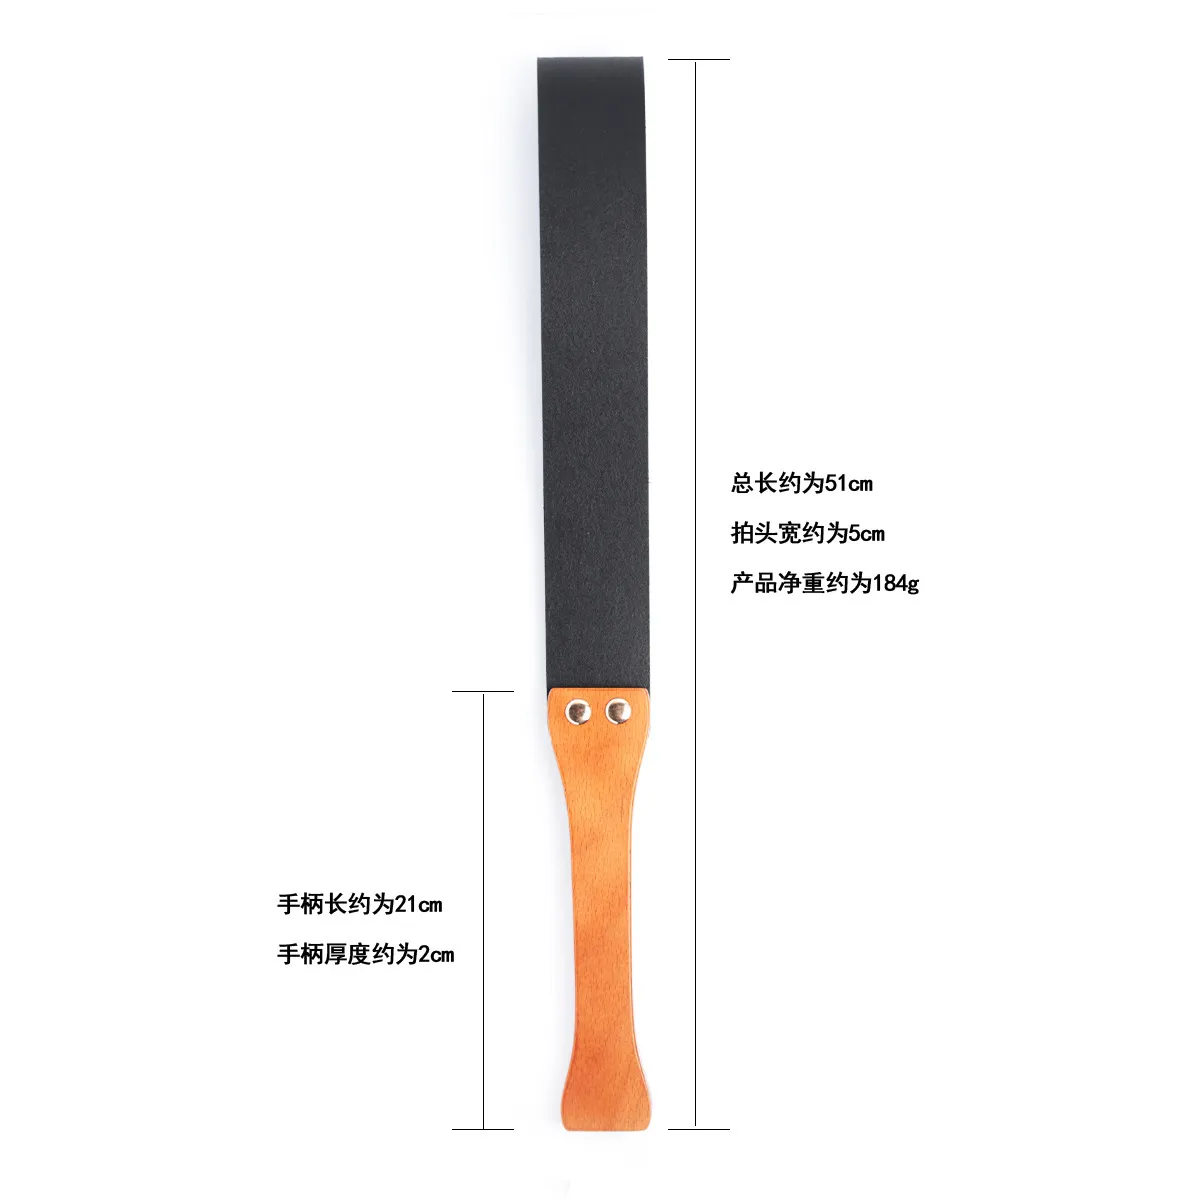 PU Leather Spanking Paddle SM Adults Products Long Whip Flirting BDSM Bondage sexy Games Exotic Accessories Adult Toys